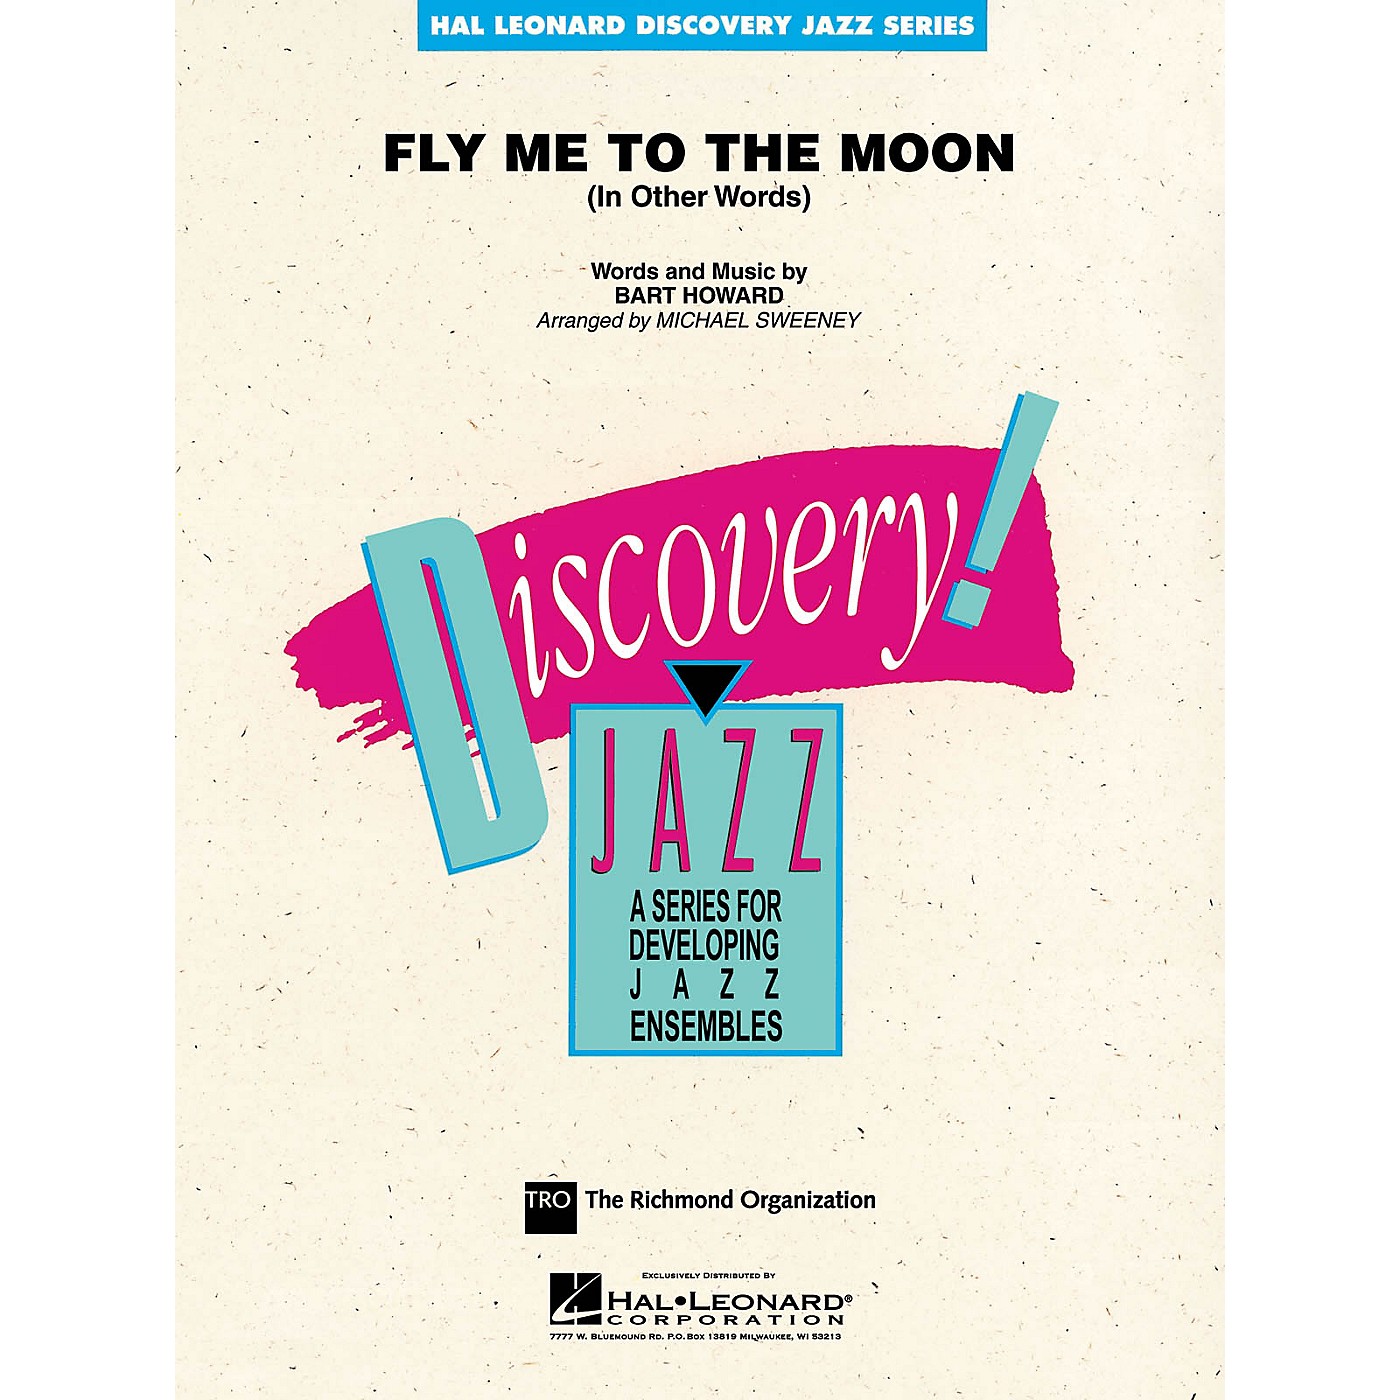 Hal Leonard Fly Me to the Moon Jazz Band Level 1 Arranged by Michael Sweeney thumbnail